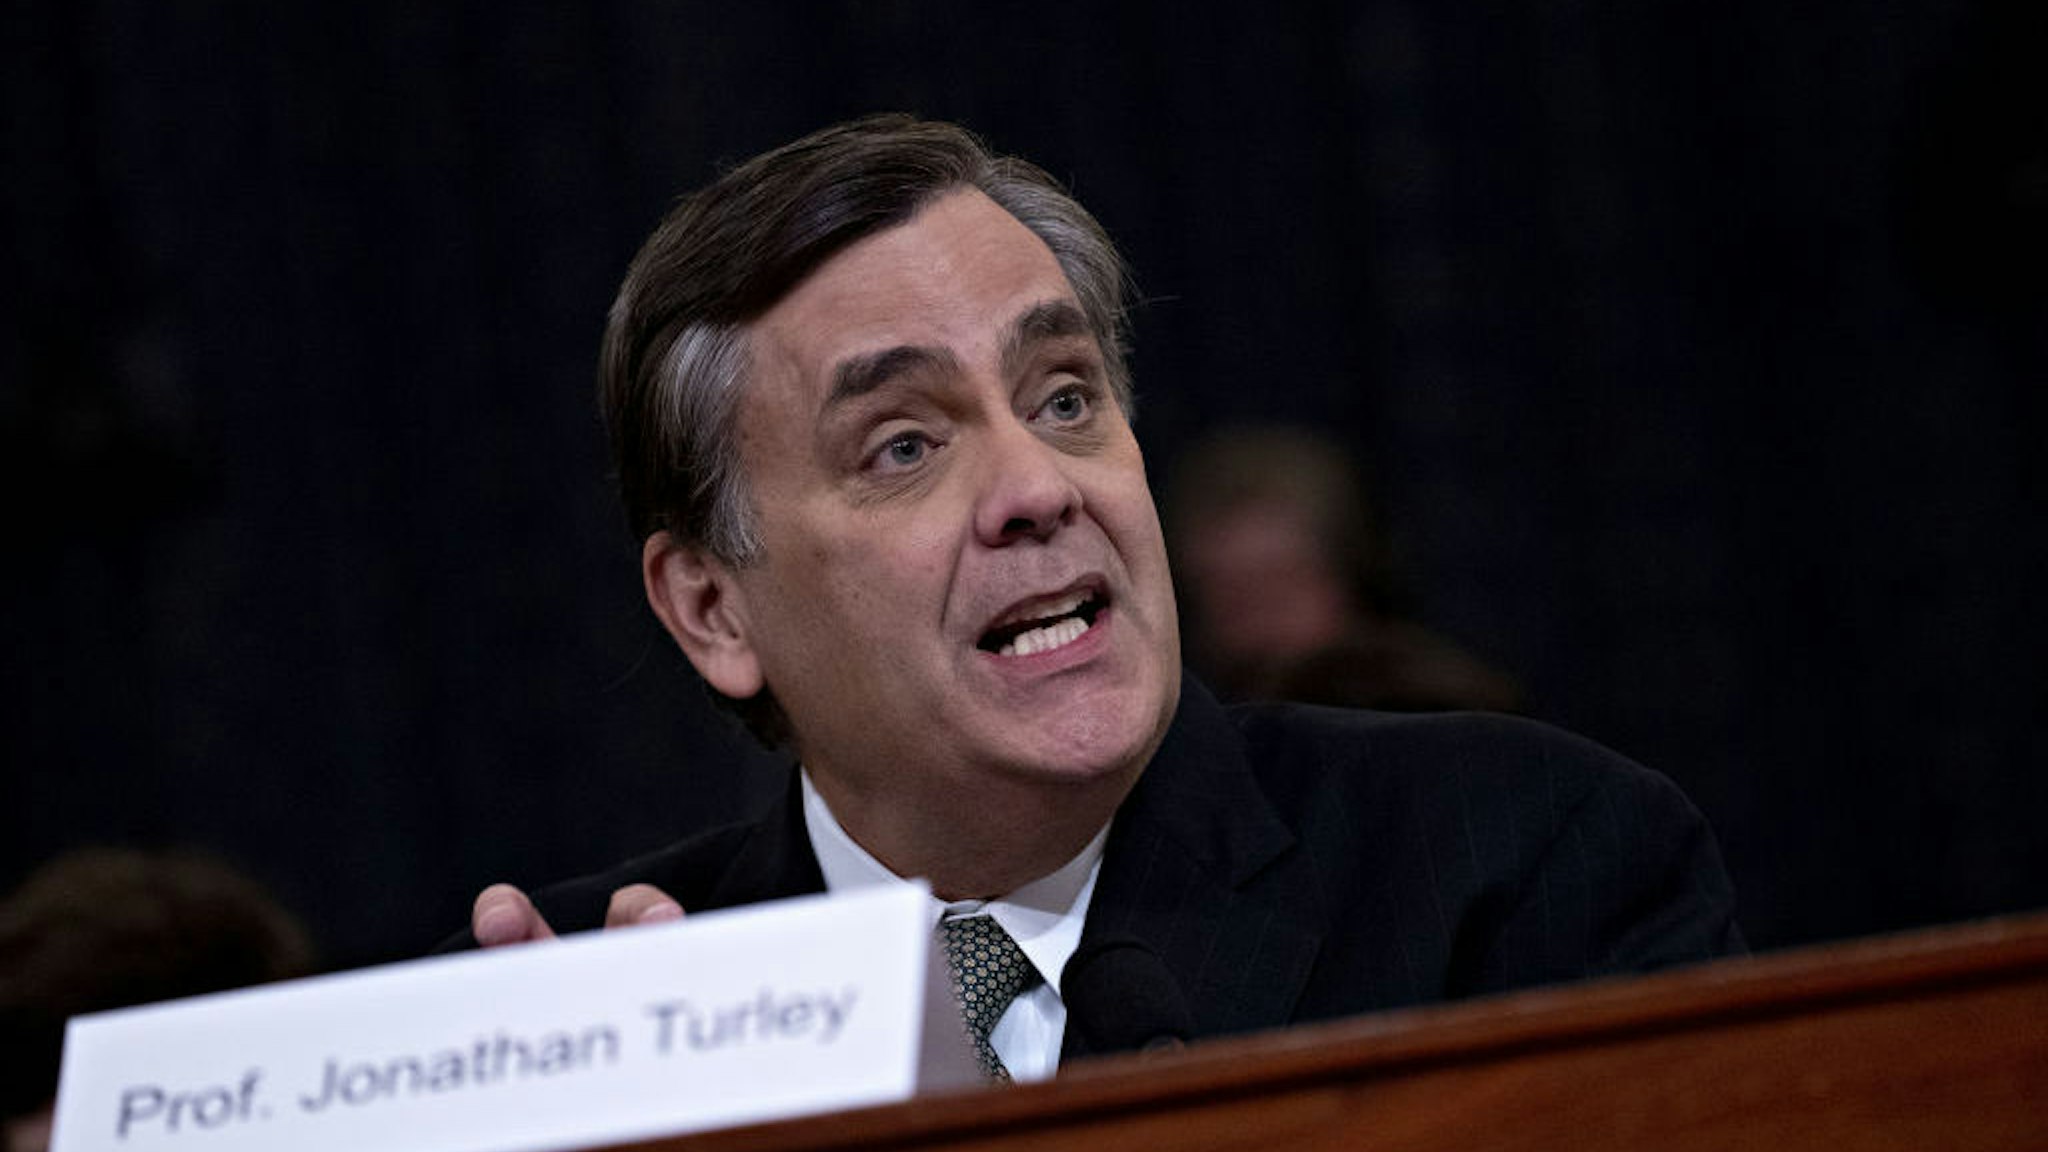 Jonathan Turley, J.B. and Maurice C. Shapiro professor of public interest law at the George Washington University Law School, speaks during a House Judiciary Committee impeachment inquiry hearing in Washington, D.C., U.S., on Wednesday, Dec. 4, 2019. The impeachment of President Donald Trump moves to one of the most polarized committees in Congress where Republicans known for their combativeness will pose a test of the judiciary chairman's ability to keep the proceedings under control. Photographer: Andrew Harrer/Bloomberg